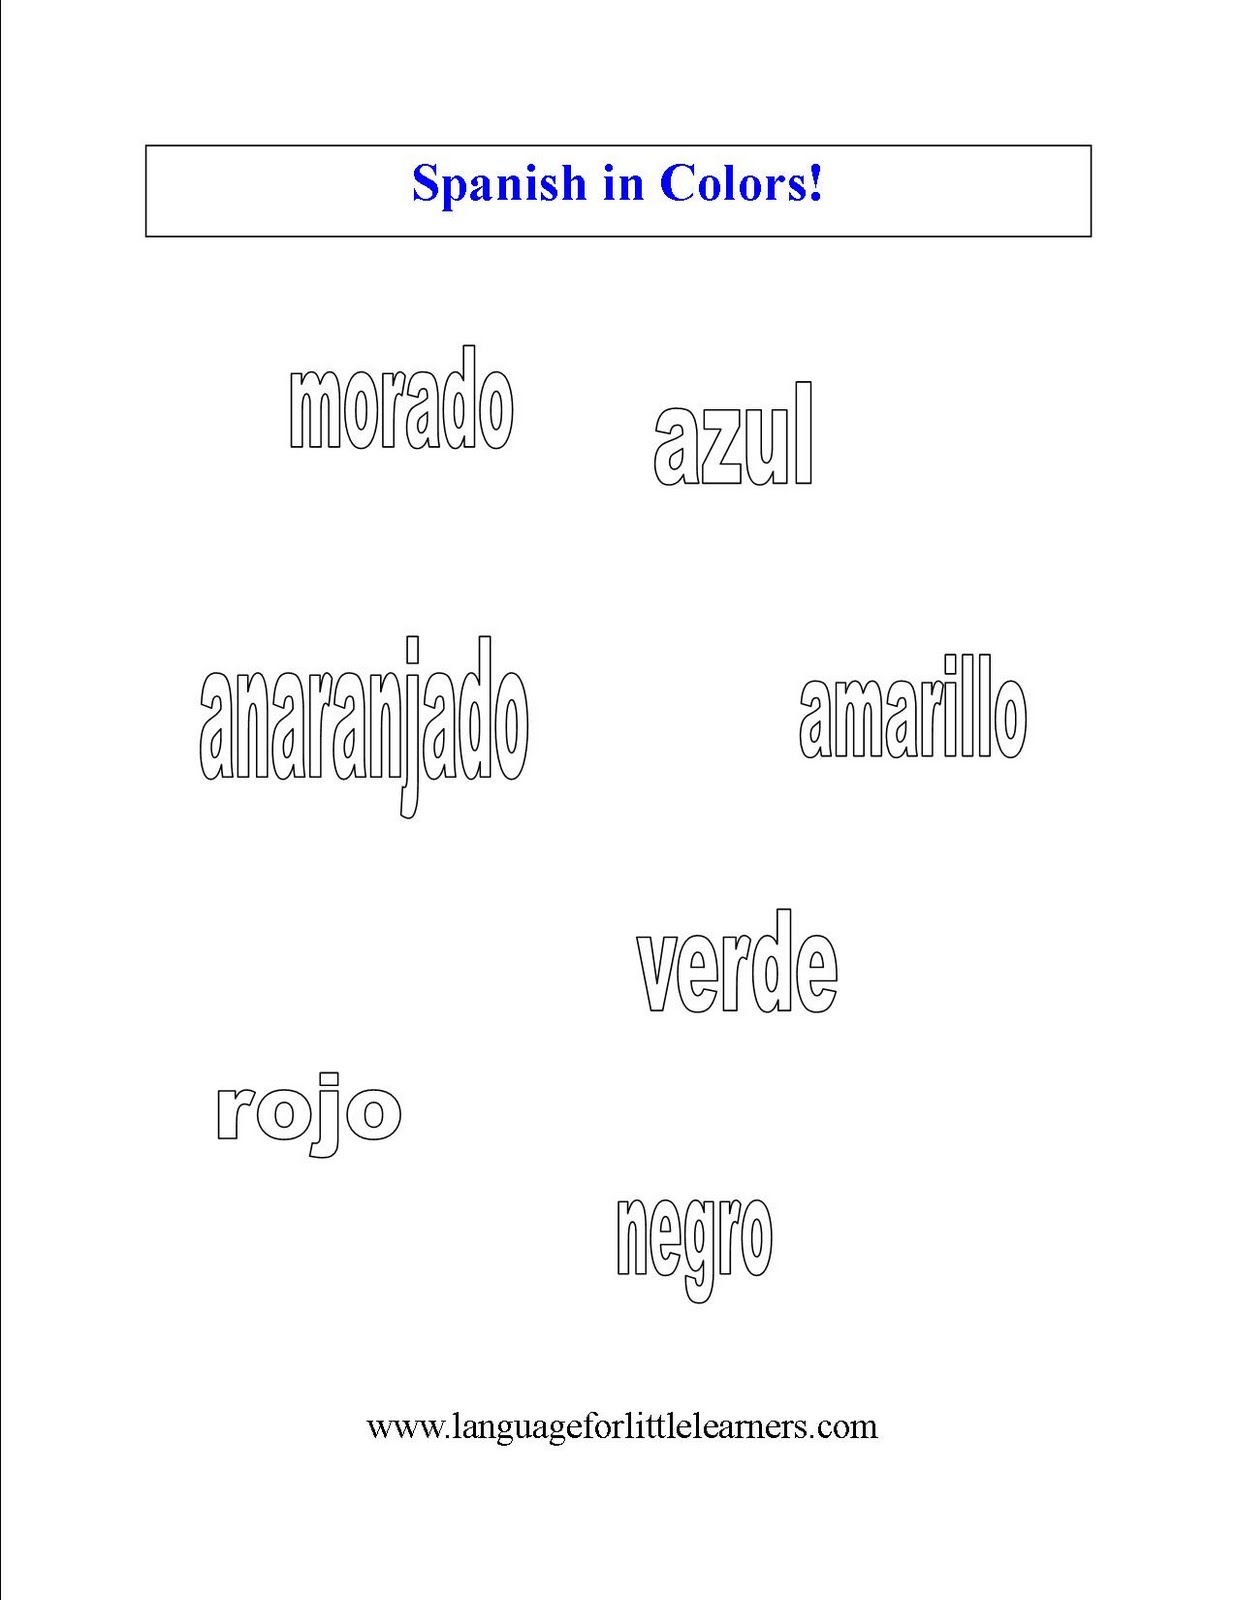 spanish-for-little-learners-worksheet-to-learn-colors-in-spanish